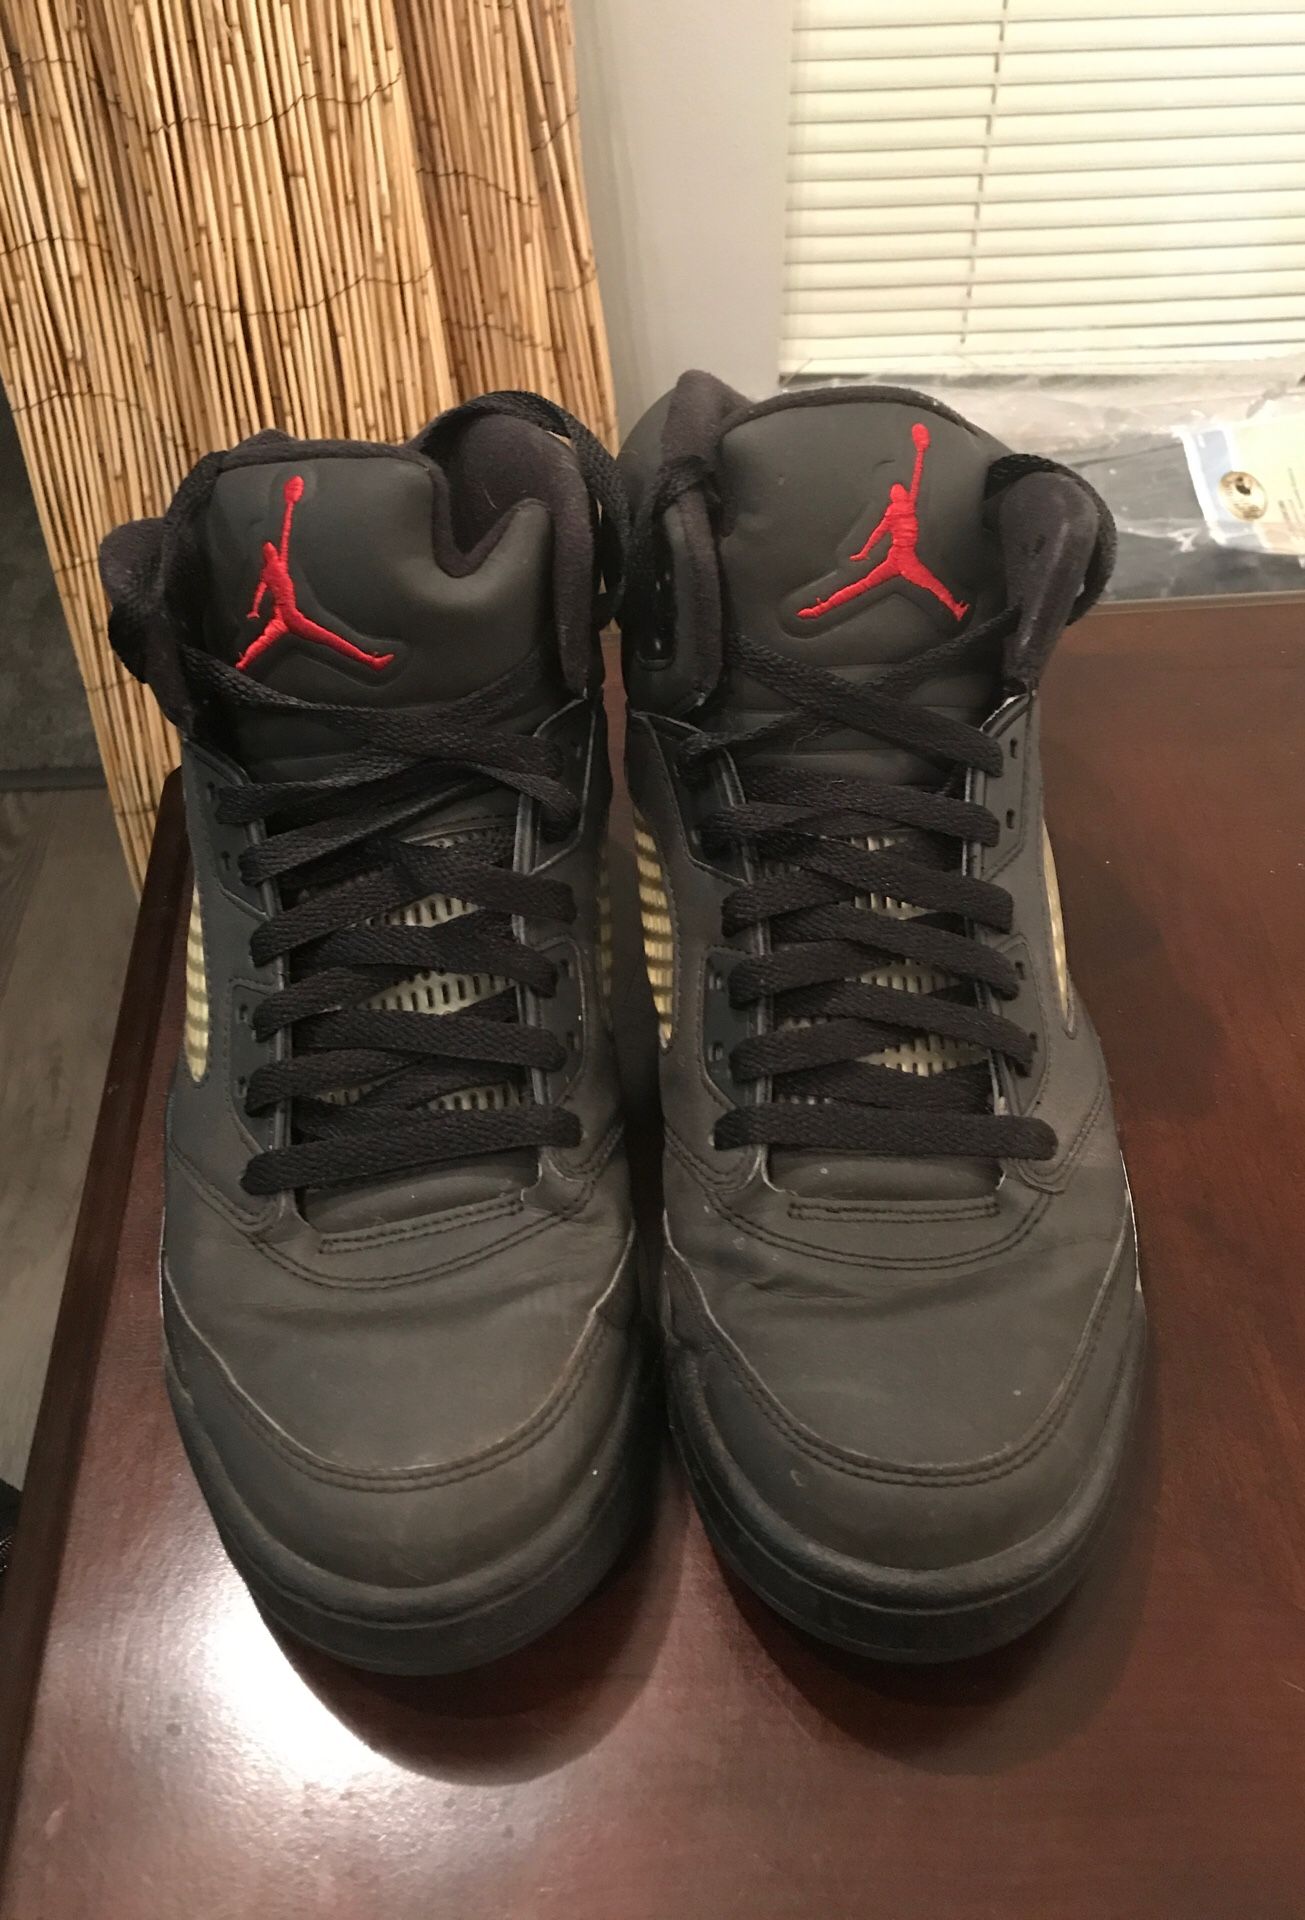 Jordan’s For the low size 10